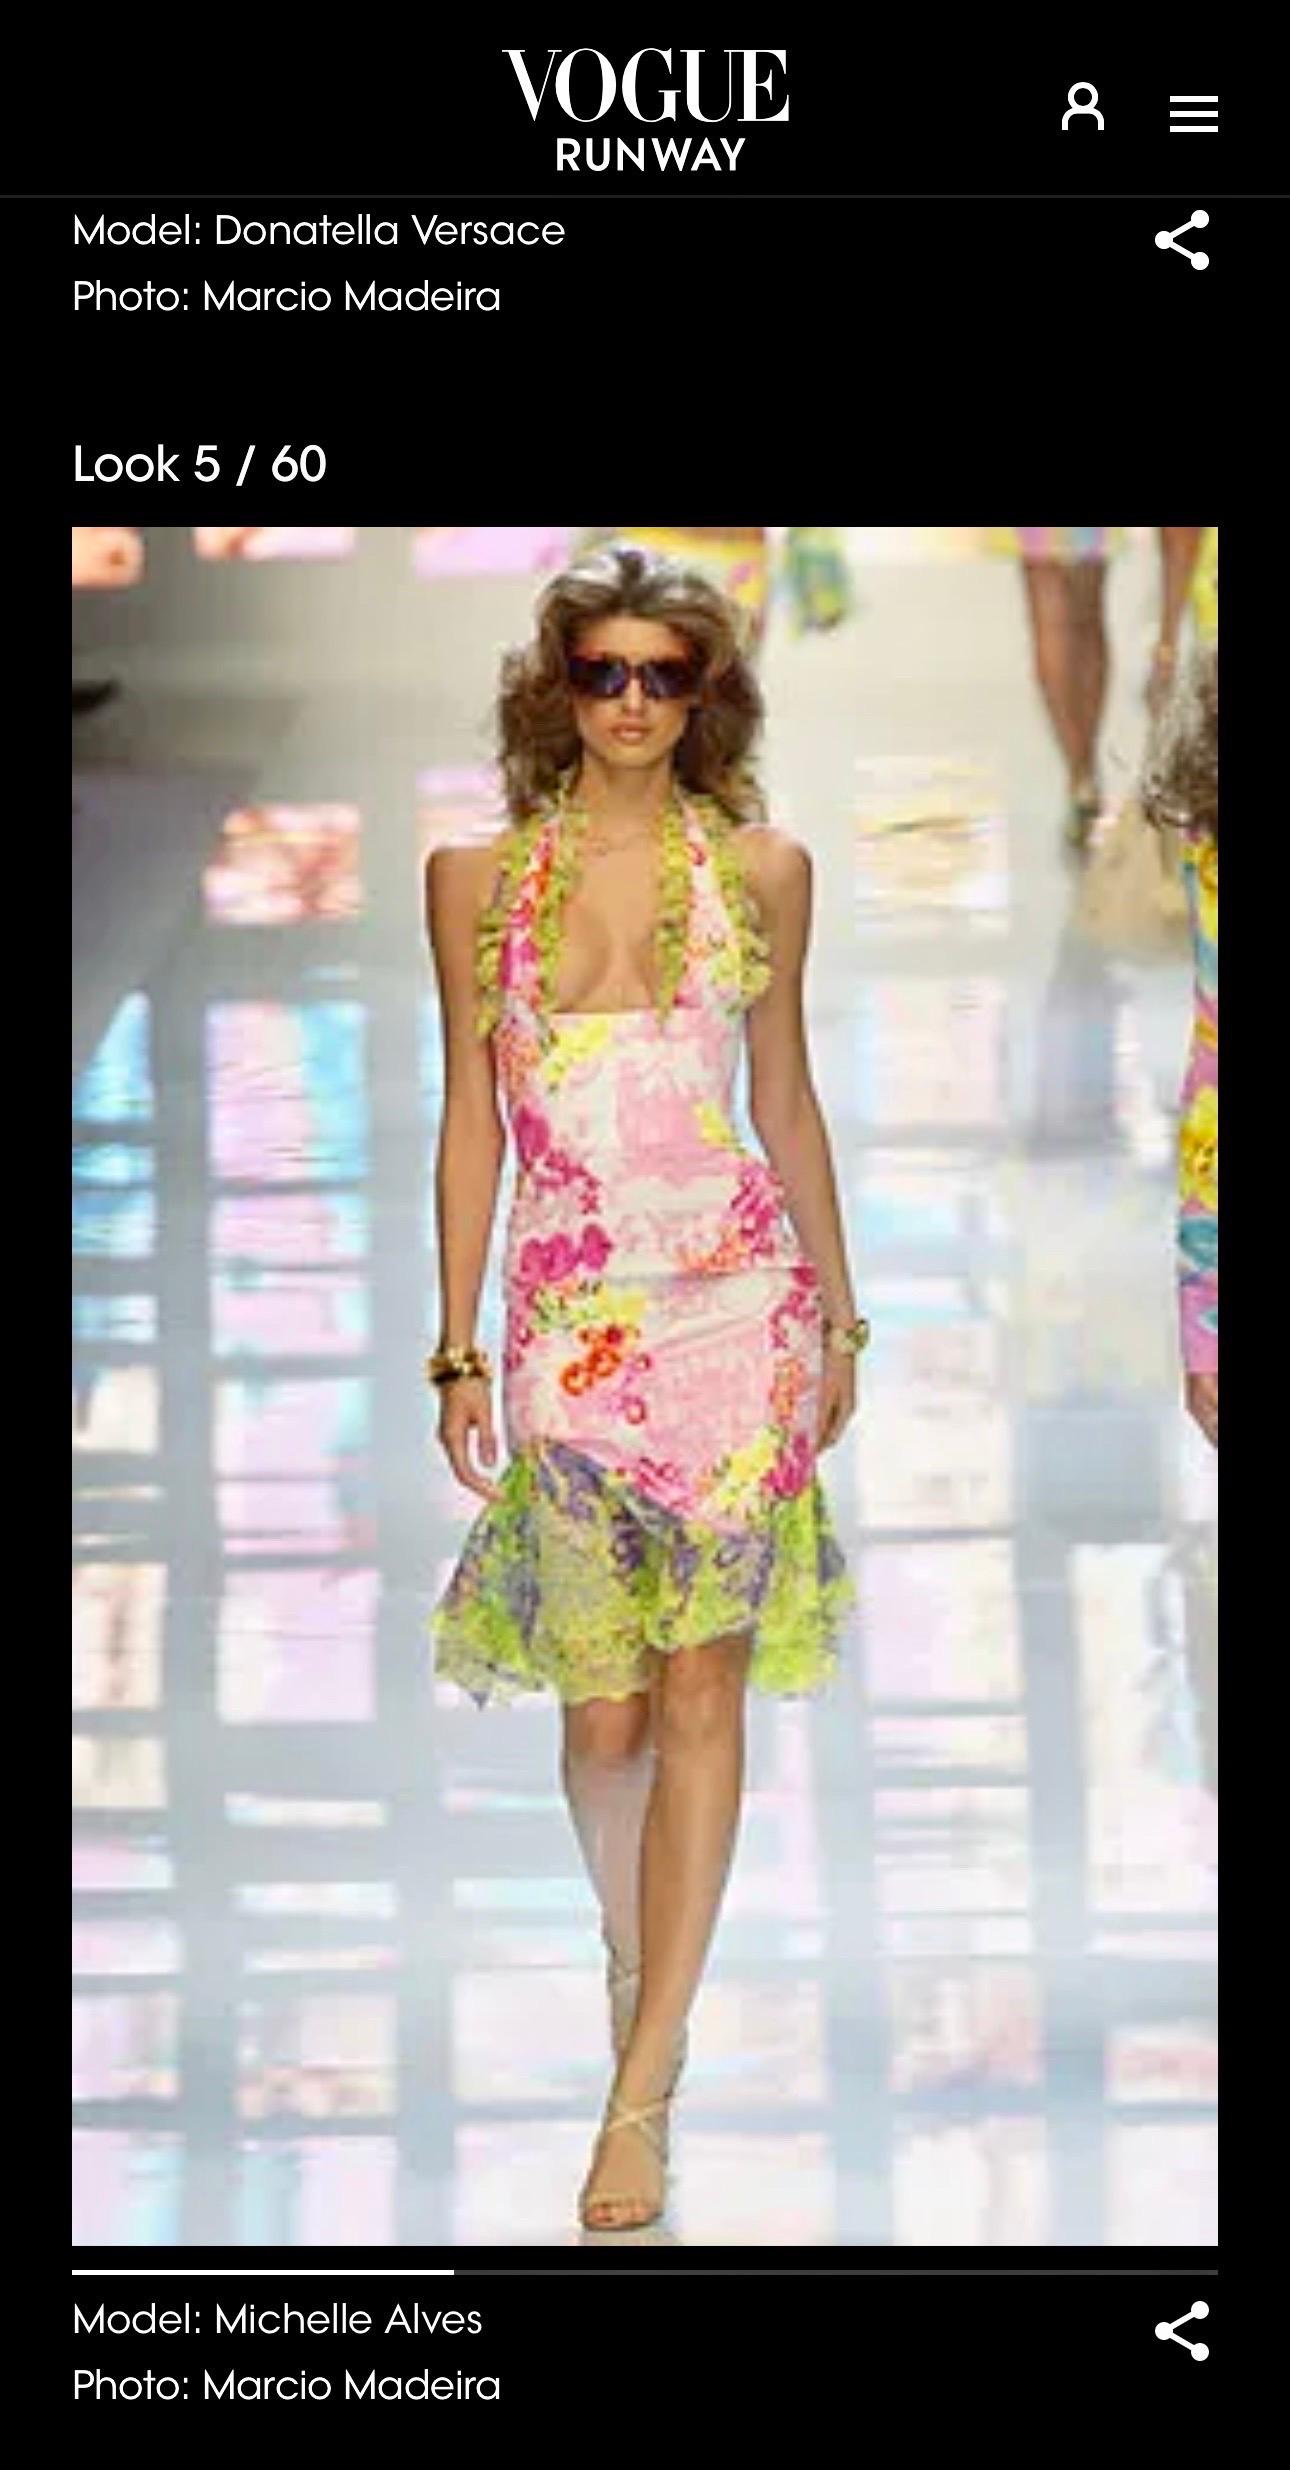 Versace S/S 2004 Runway Floral Print Ruffle Plunging Neckline Low Back Dress 7